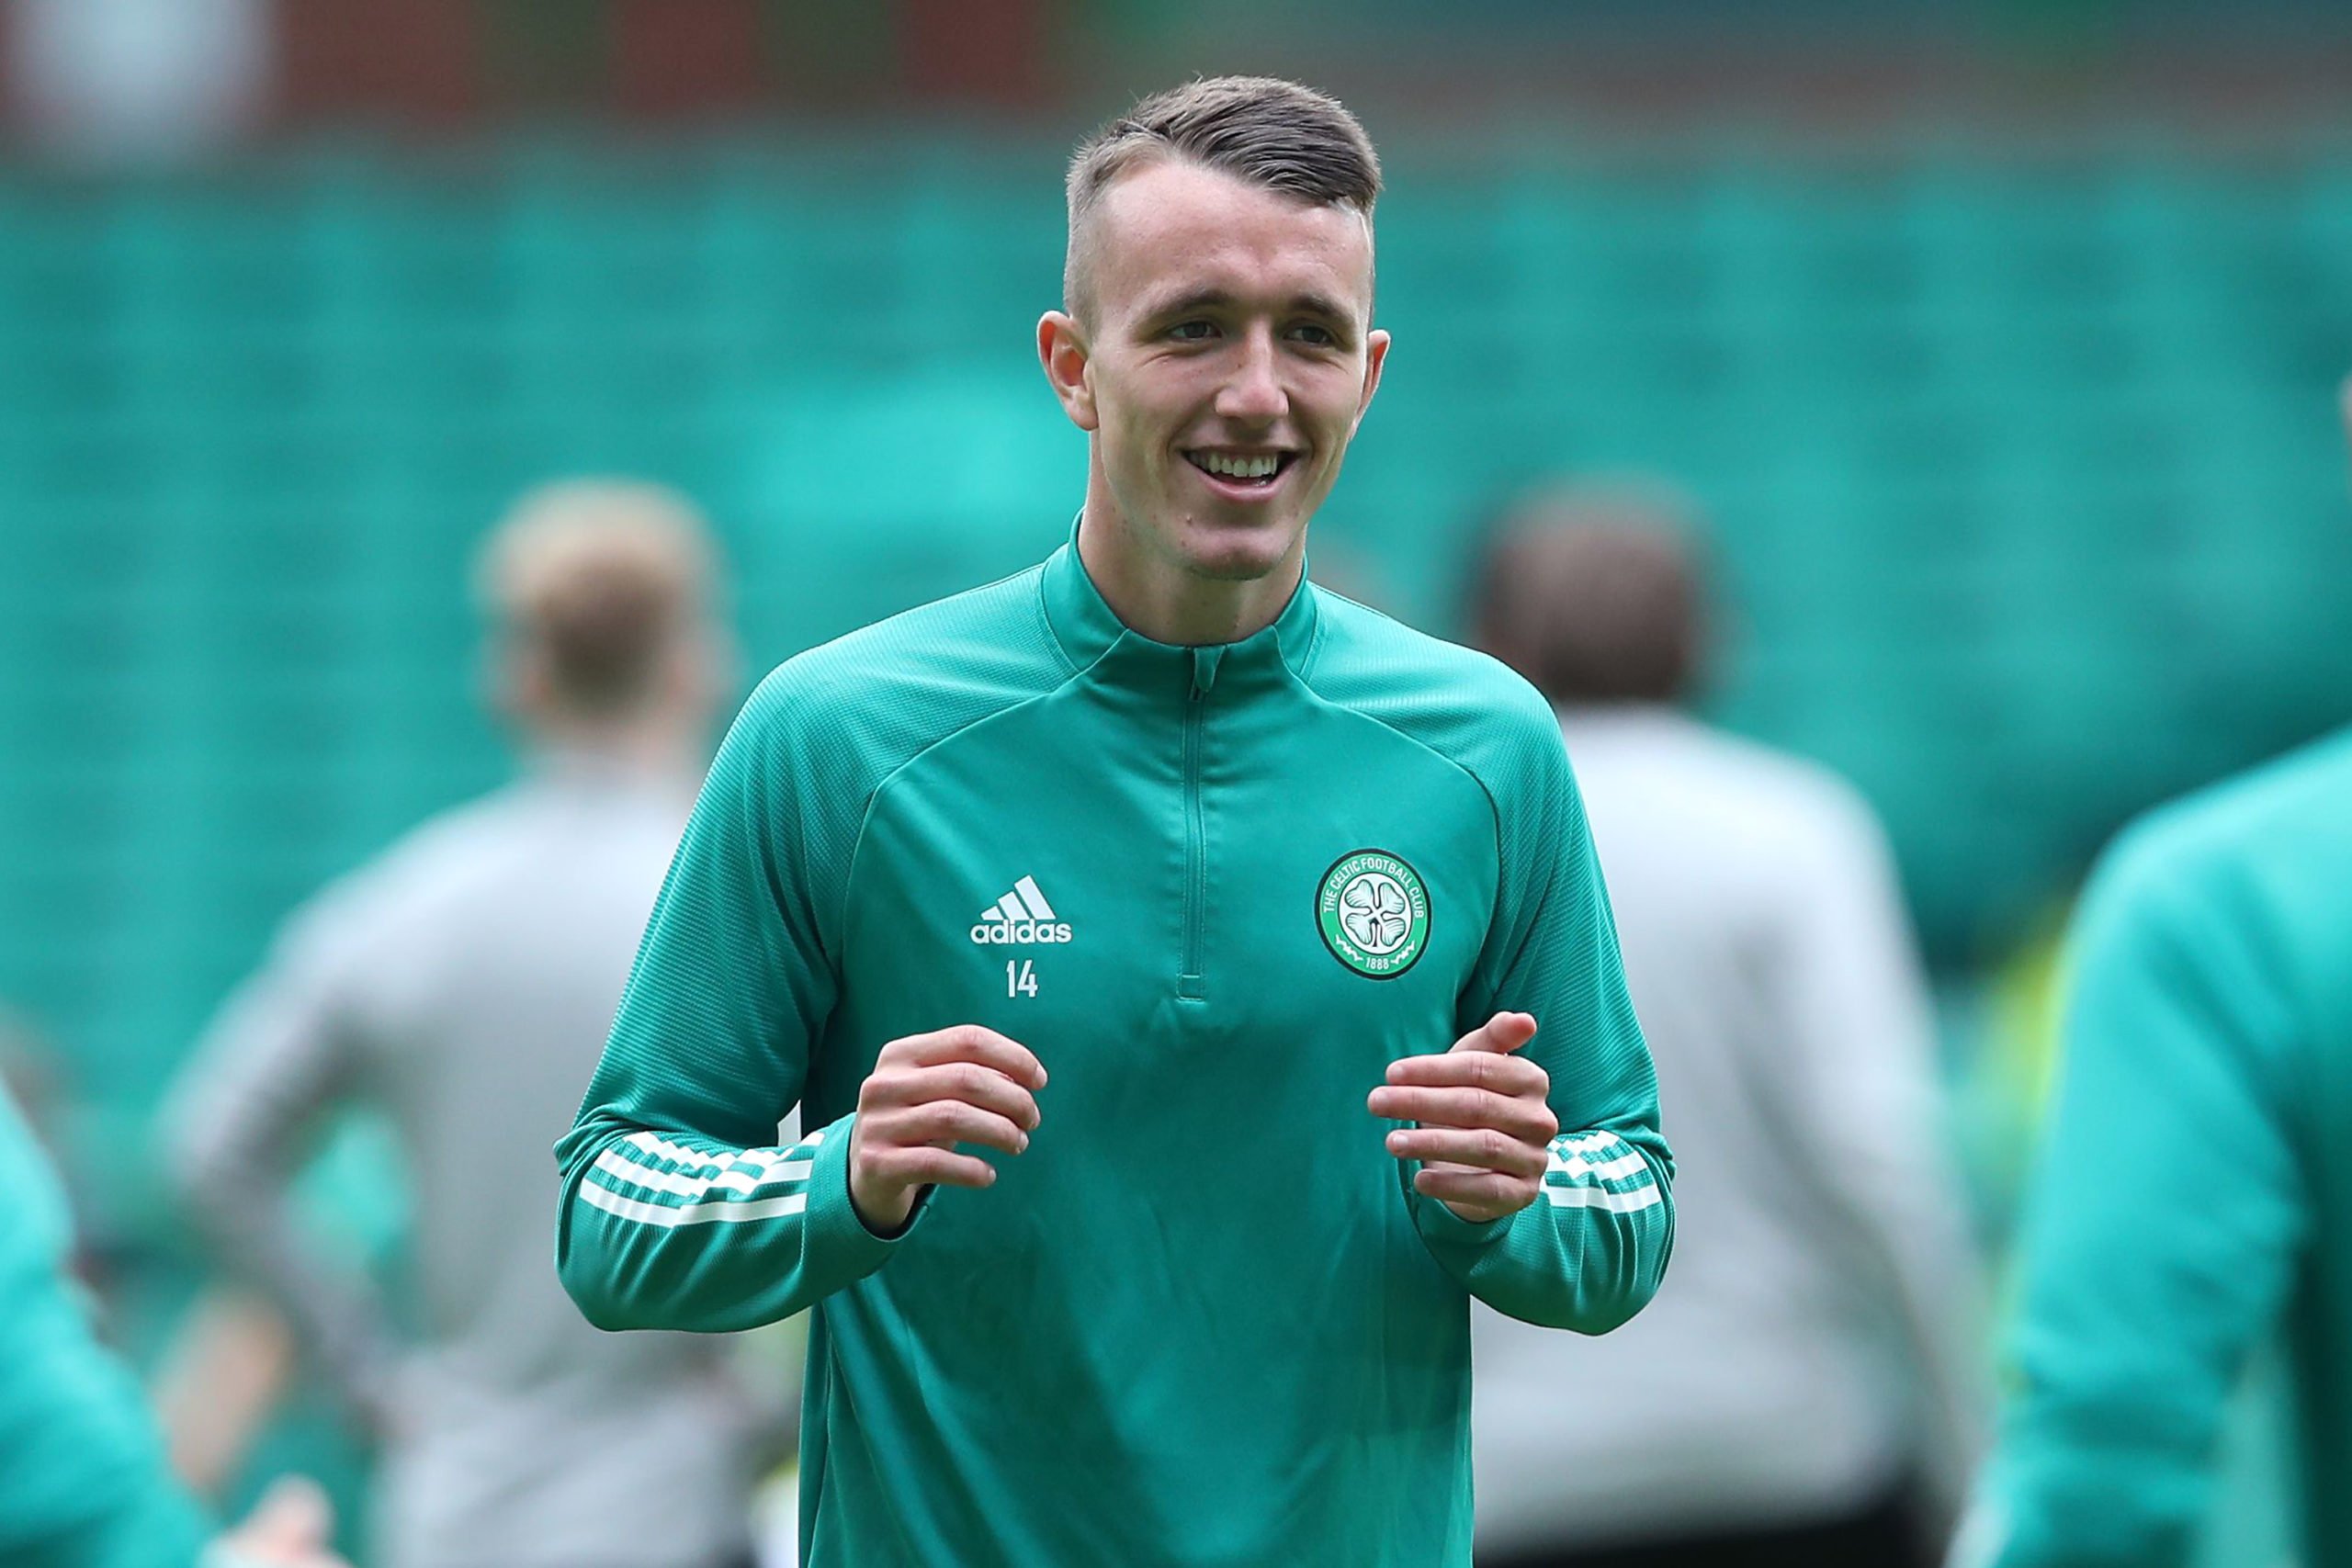 'He is going to be huge'; Celtic fans wowed by David Turnbull as he gets 45 minutes in win over Hibs